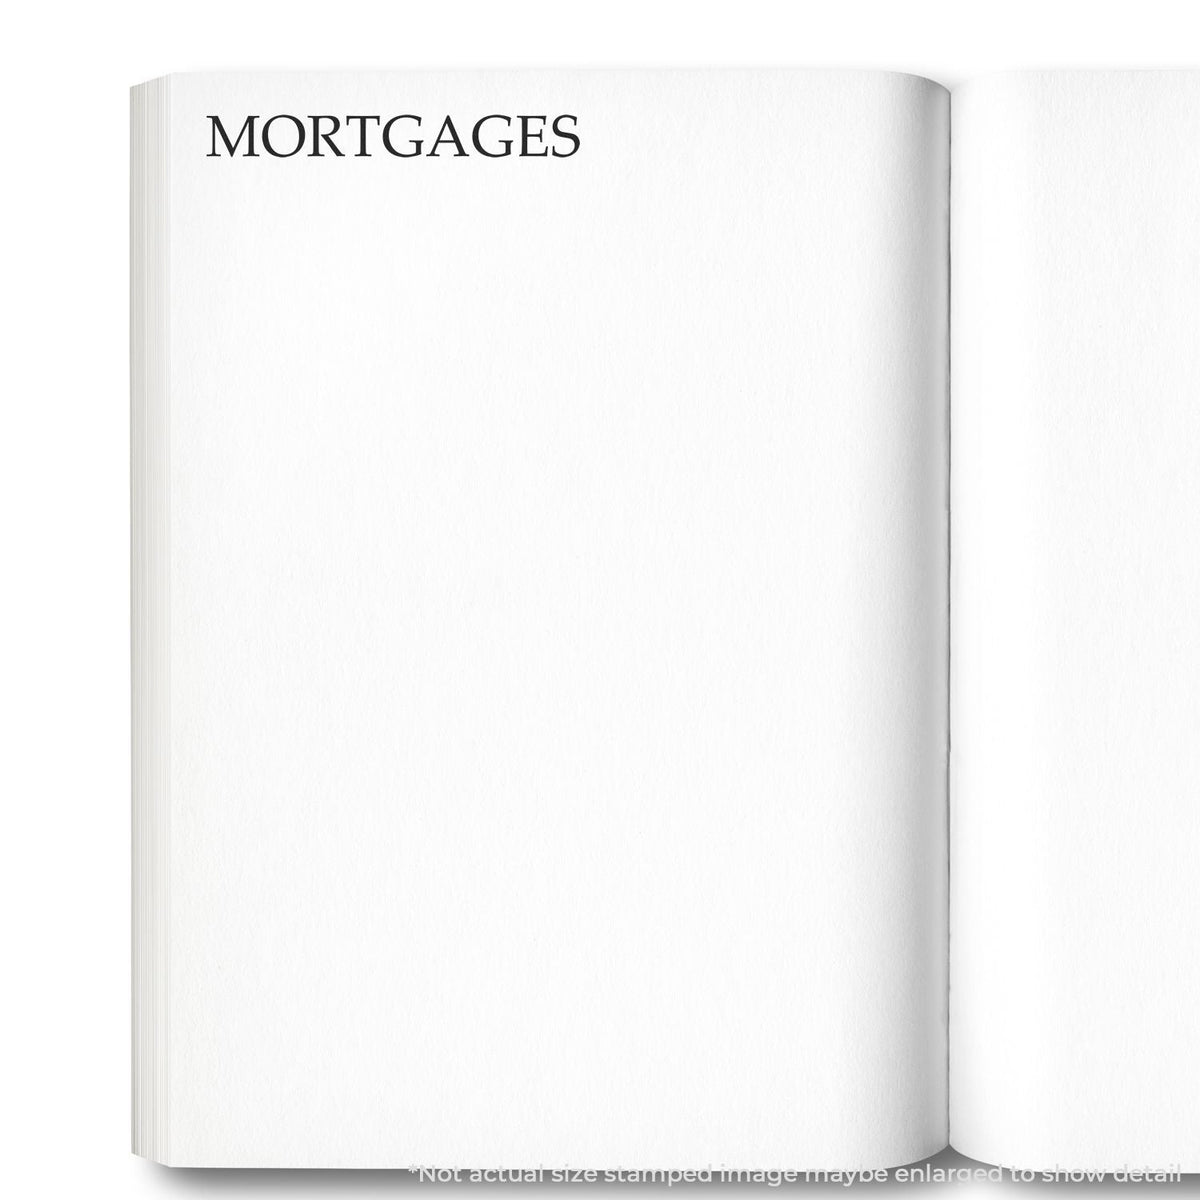 In Use Self Inking Mortgages Stamp Image